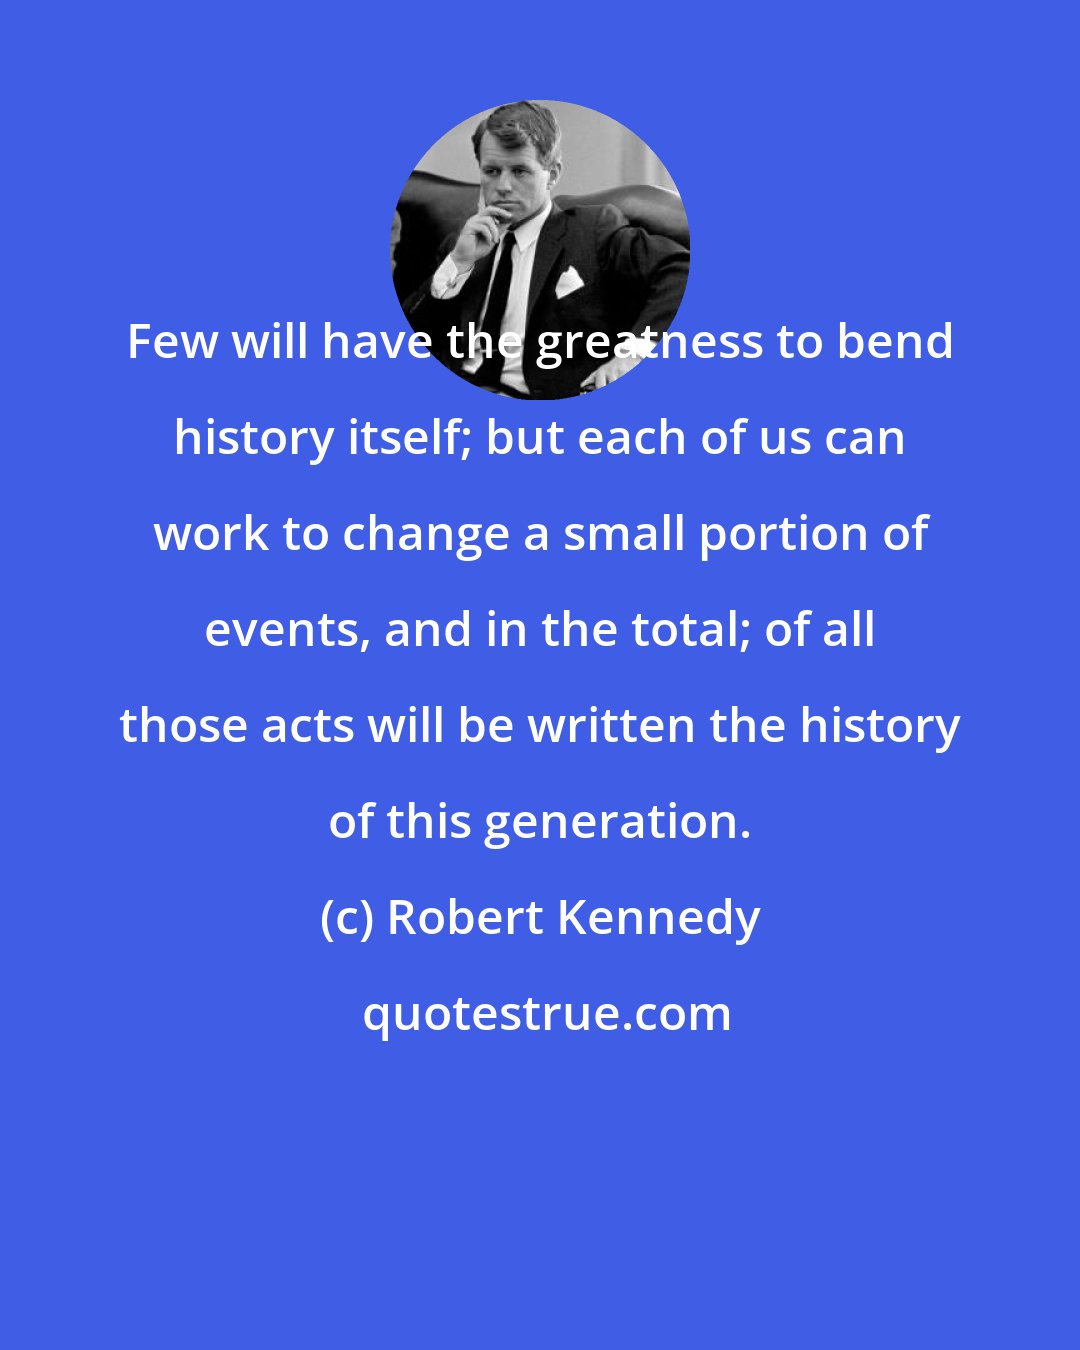 Robert Kennedy: Few will have the greatness to bend history itself; but each of us can work to change a small portion of events, and in the total; of all those acts will be written the history of this generation.